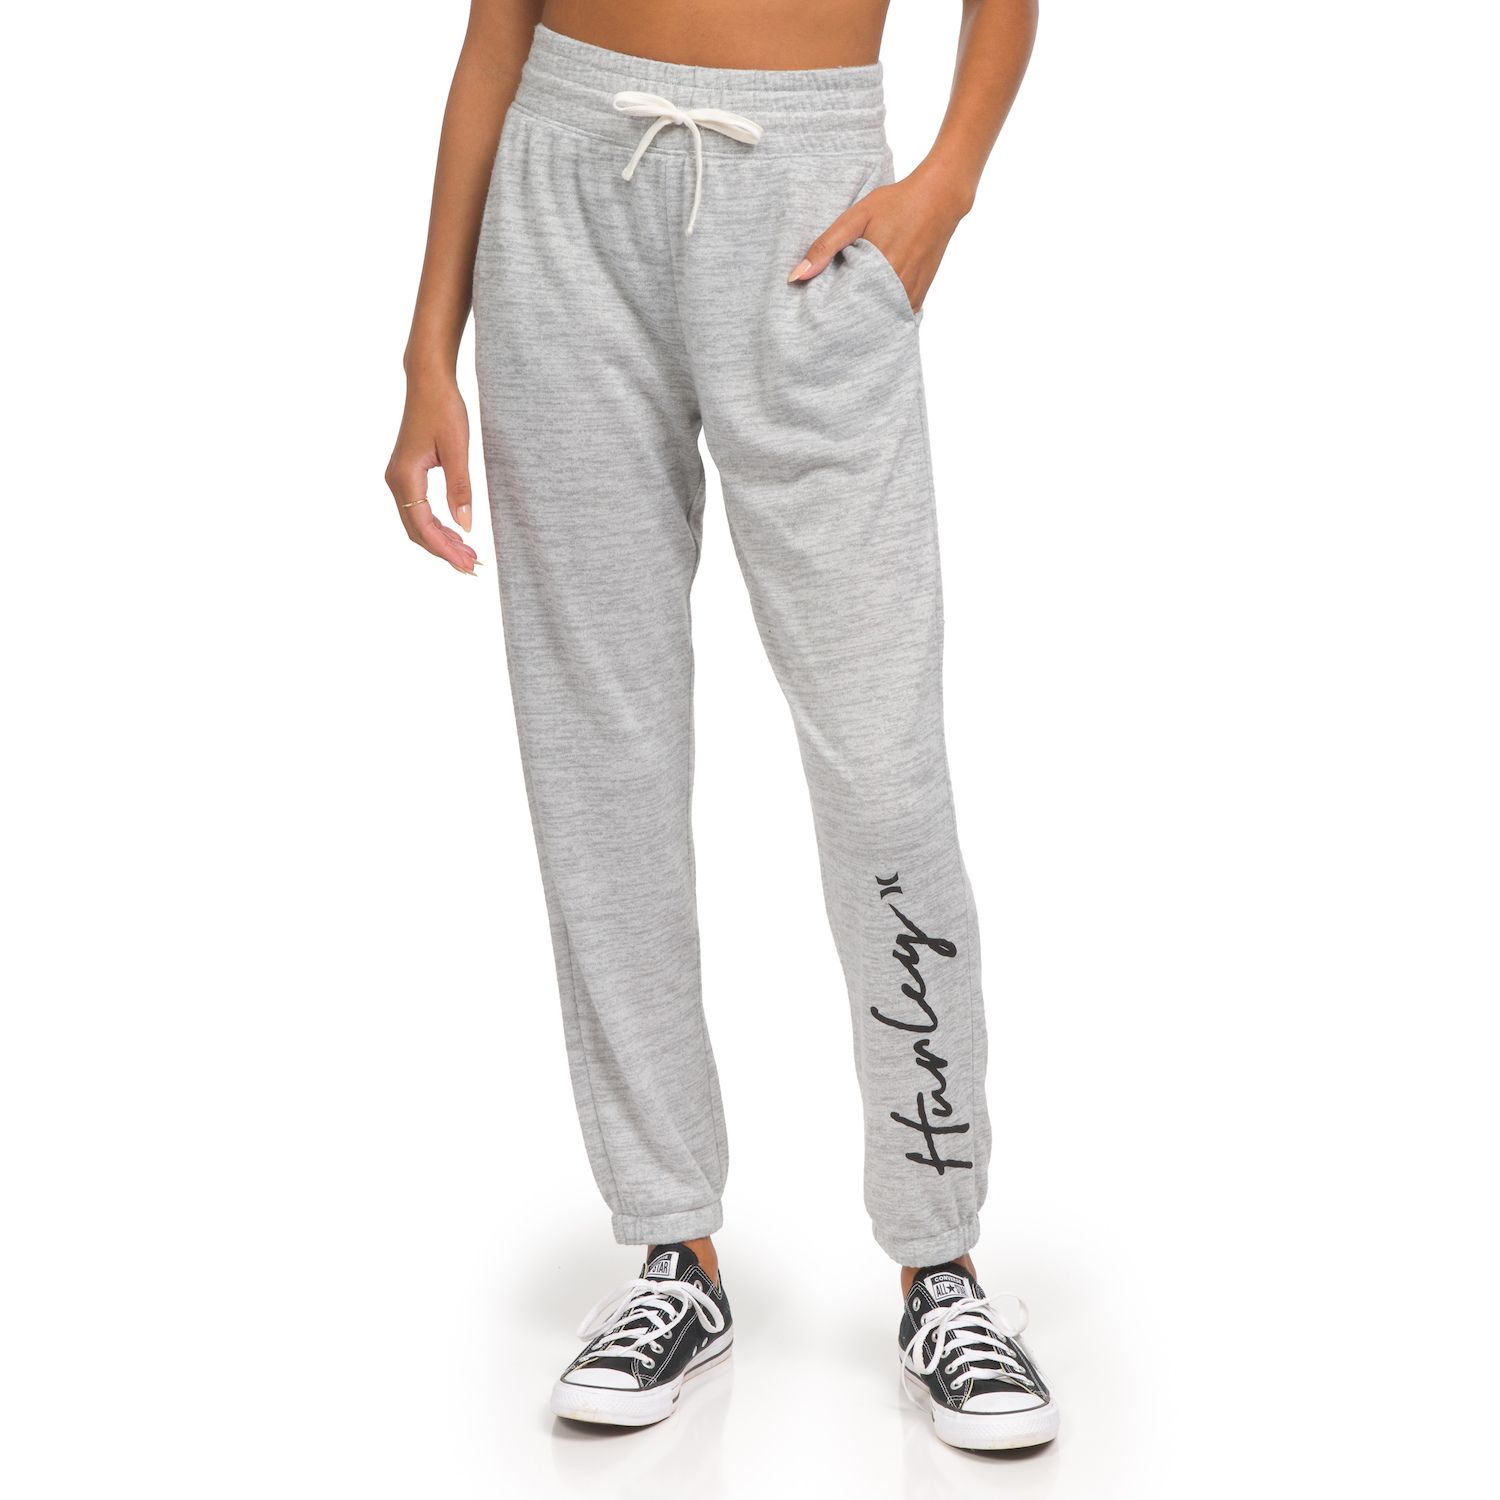 Image for Hurley Juniors' Hacci Chill Fleece Joggers at Kohl's.